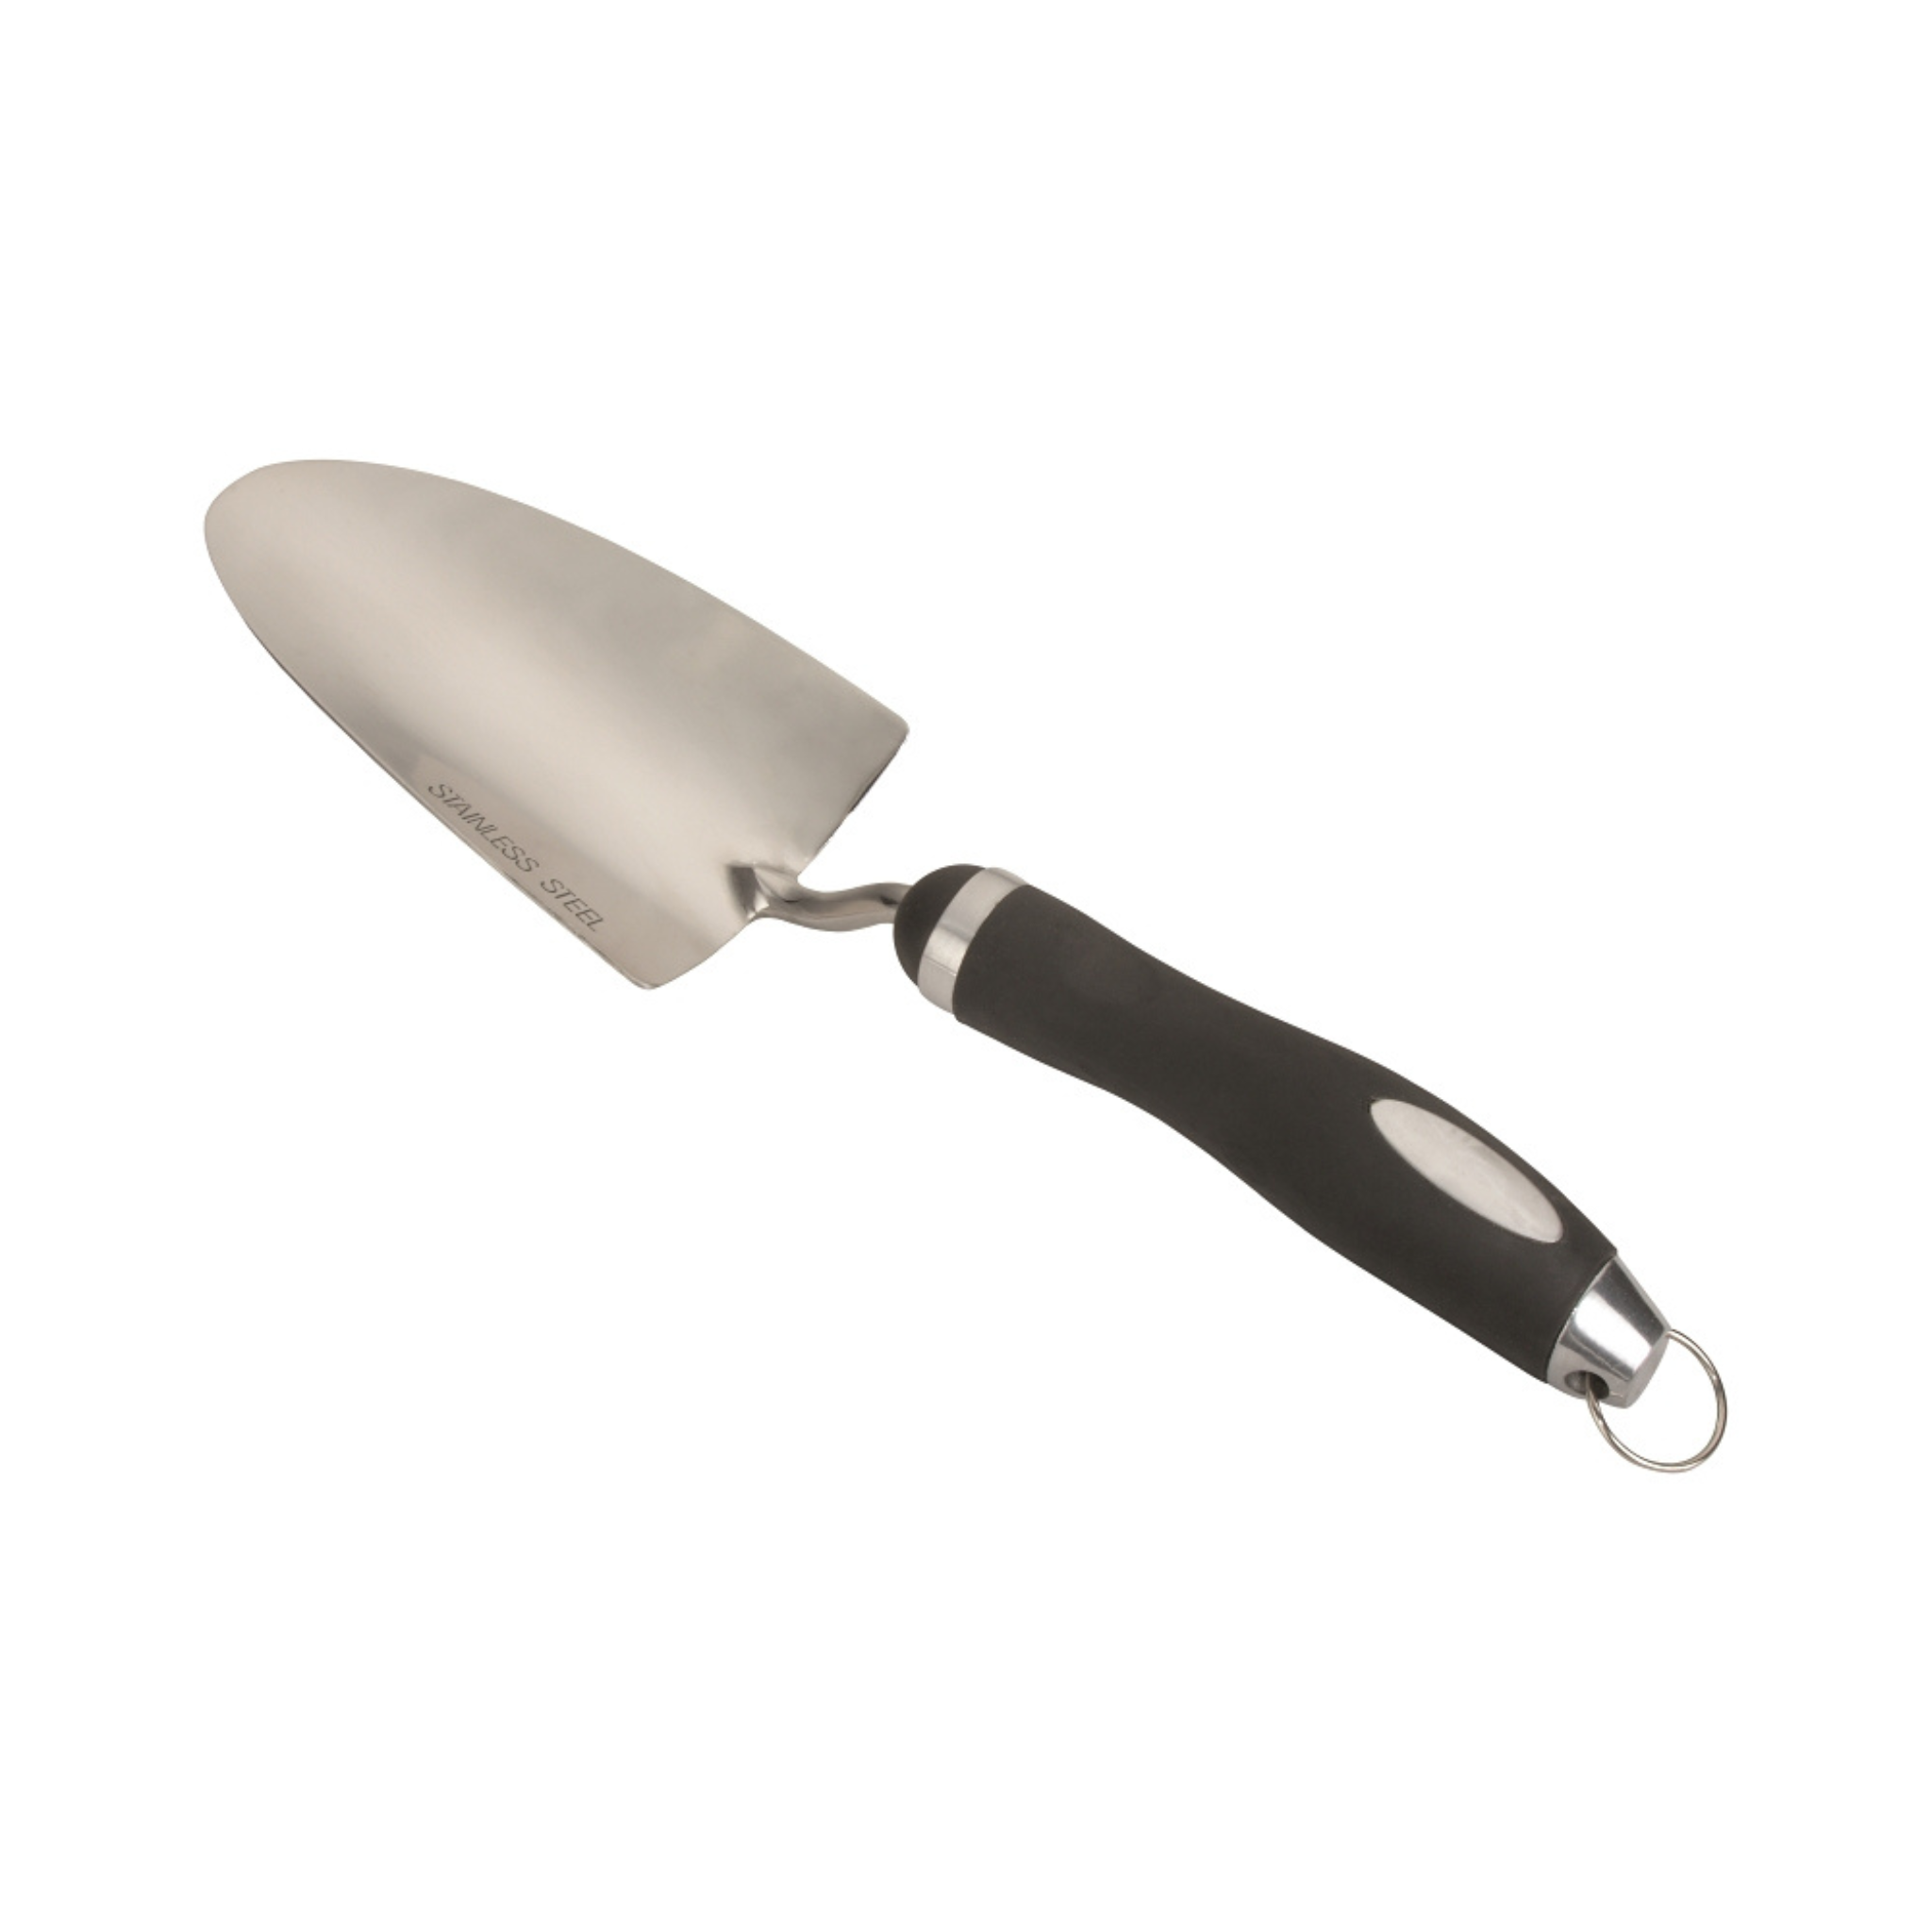 14" Stainless Steel Trowel with Cushion Grip Handle